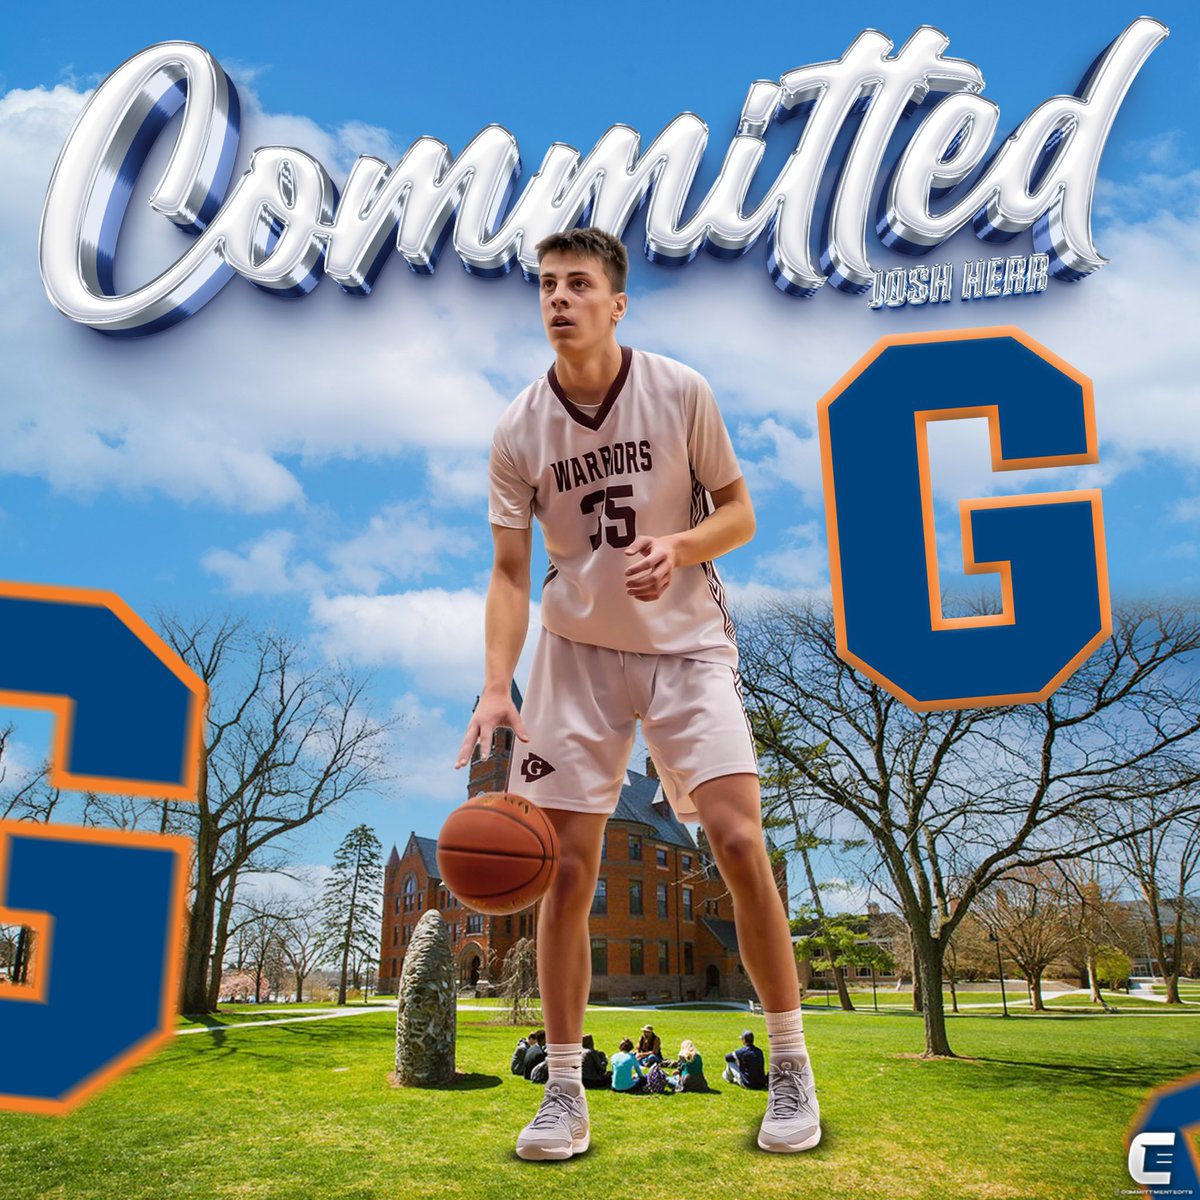 Extremely excited to announce my commitment to Gettysburg College to continue my academic and athletic career! Grateful to @CoachBJDunne for this incredible opportunity. Thank you to my family, teammates, and coaches for helping tremendously along this journey. #PoundTheRock 🧡